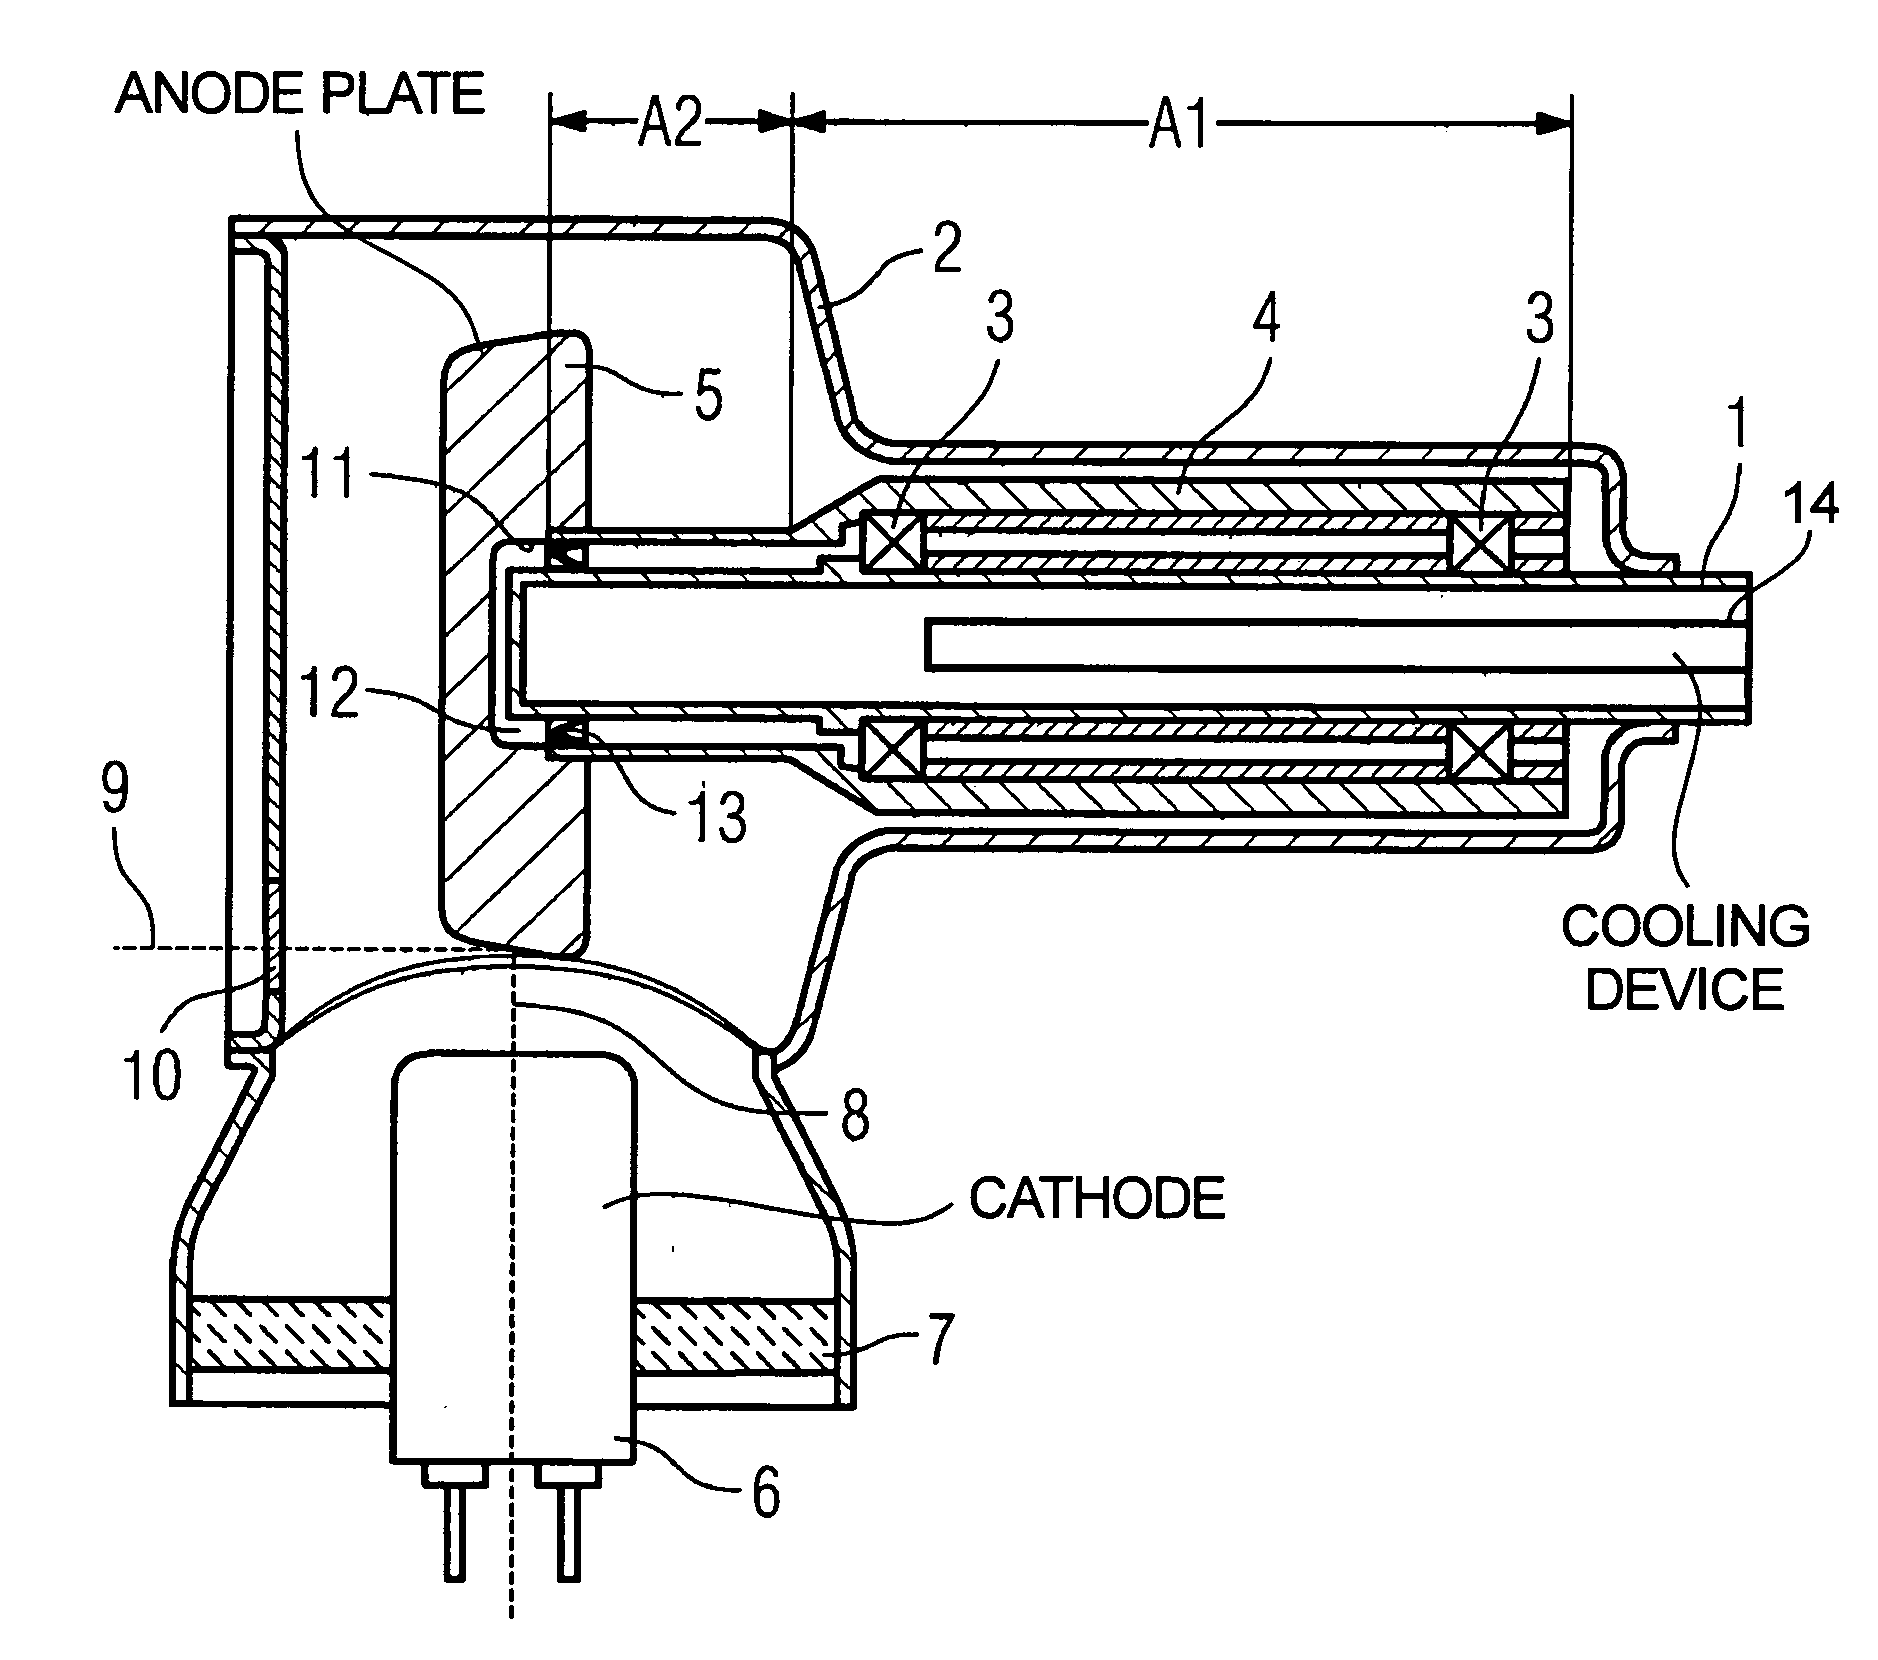 X-ray tube with rotary anode